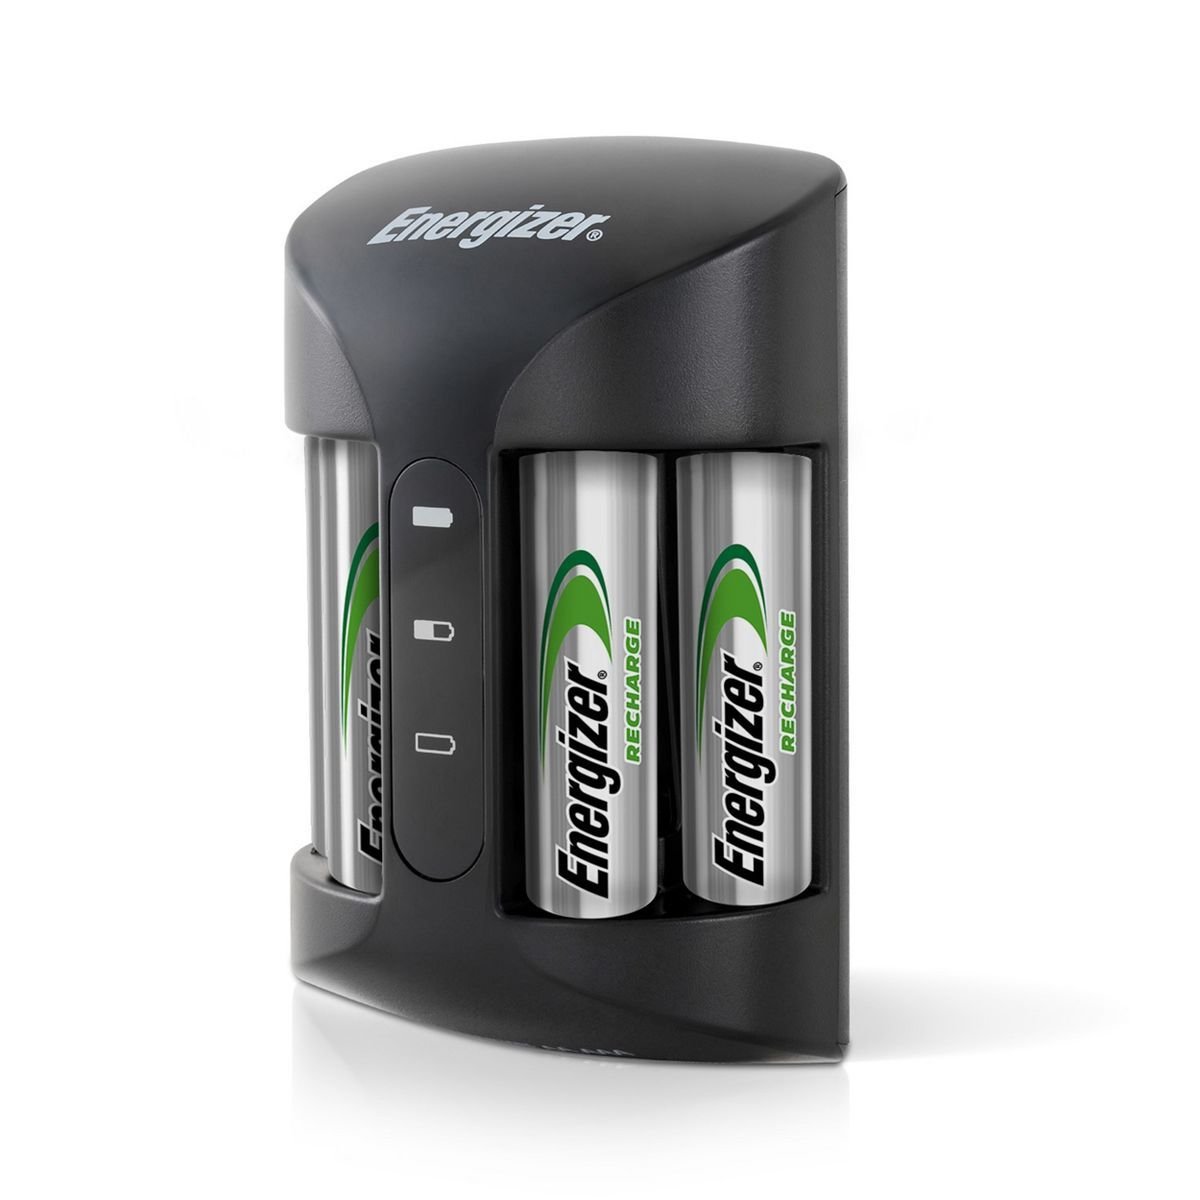 Energizer Recharge Pro Charger for NiMH Rechargeable AA and AAA Batteries | Target